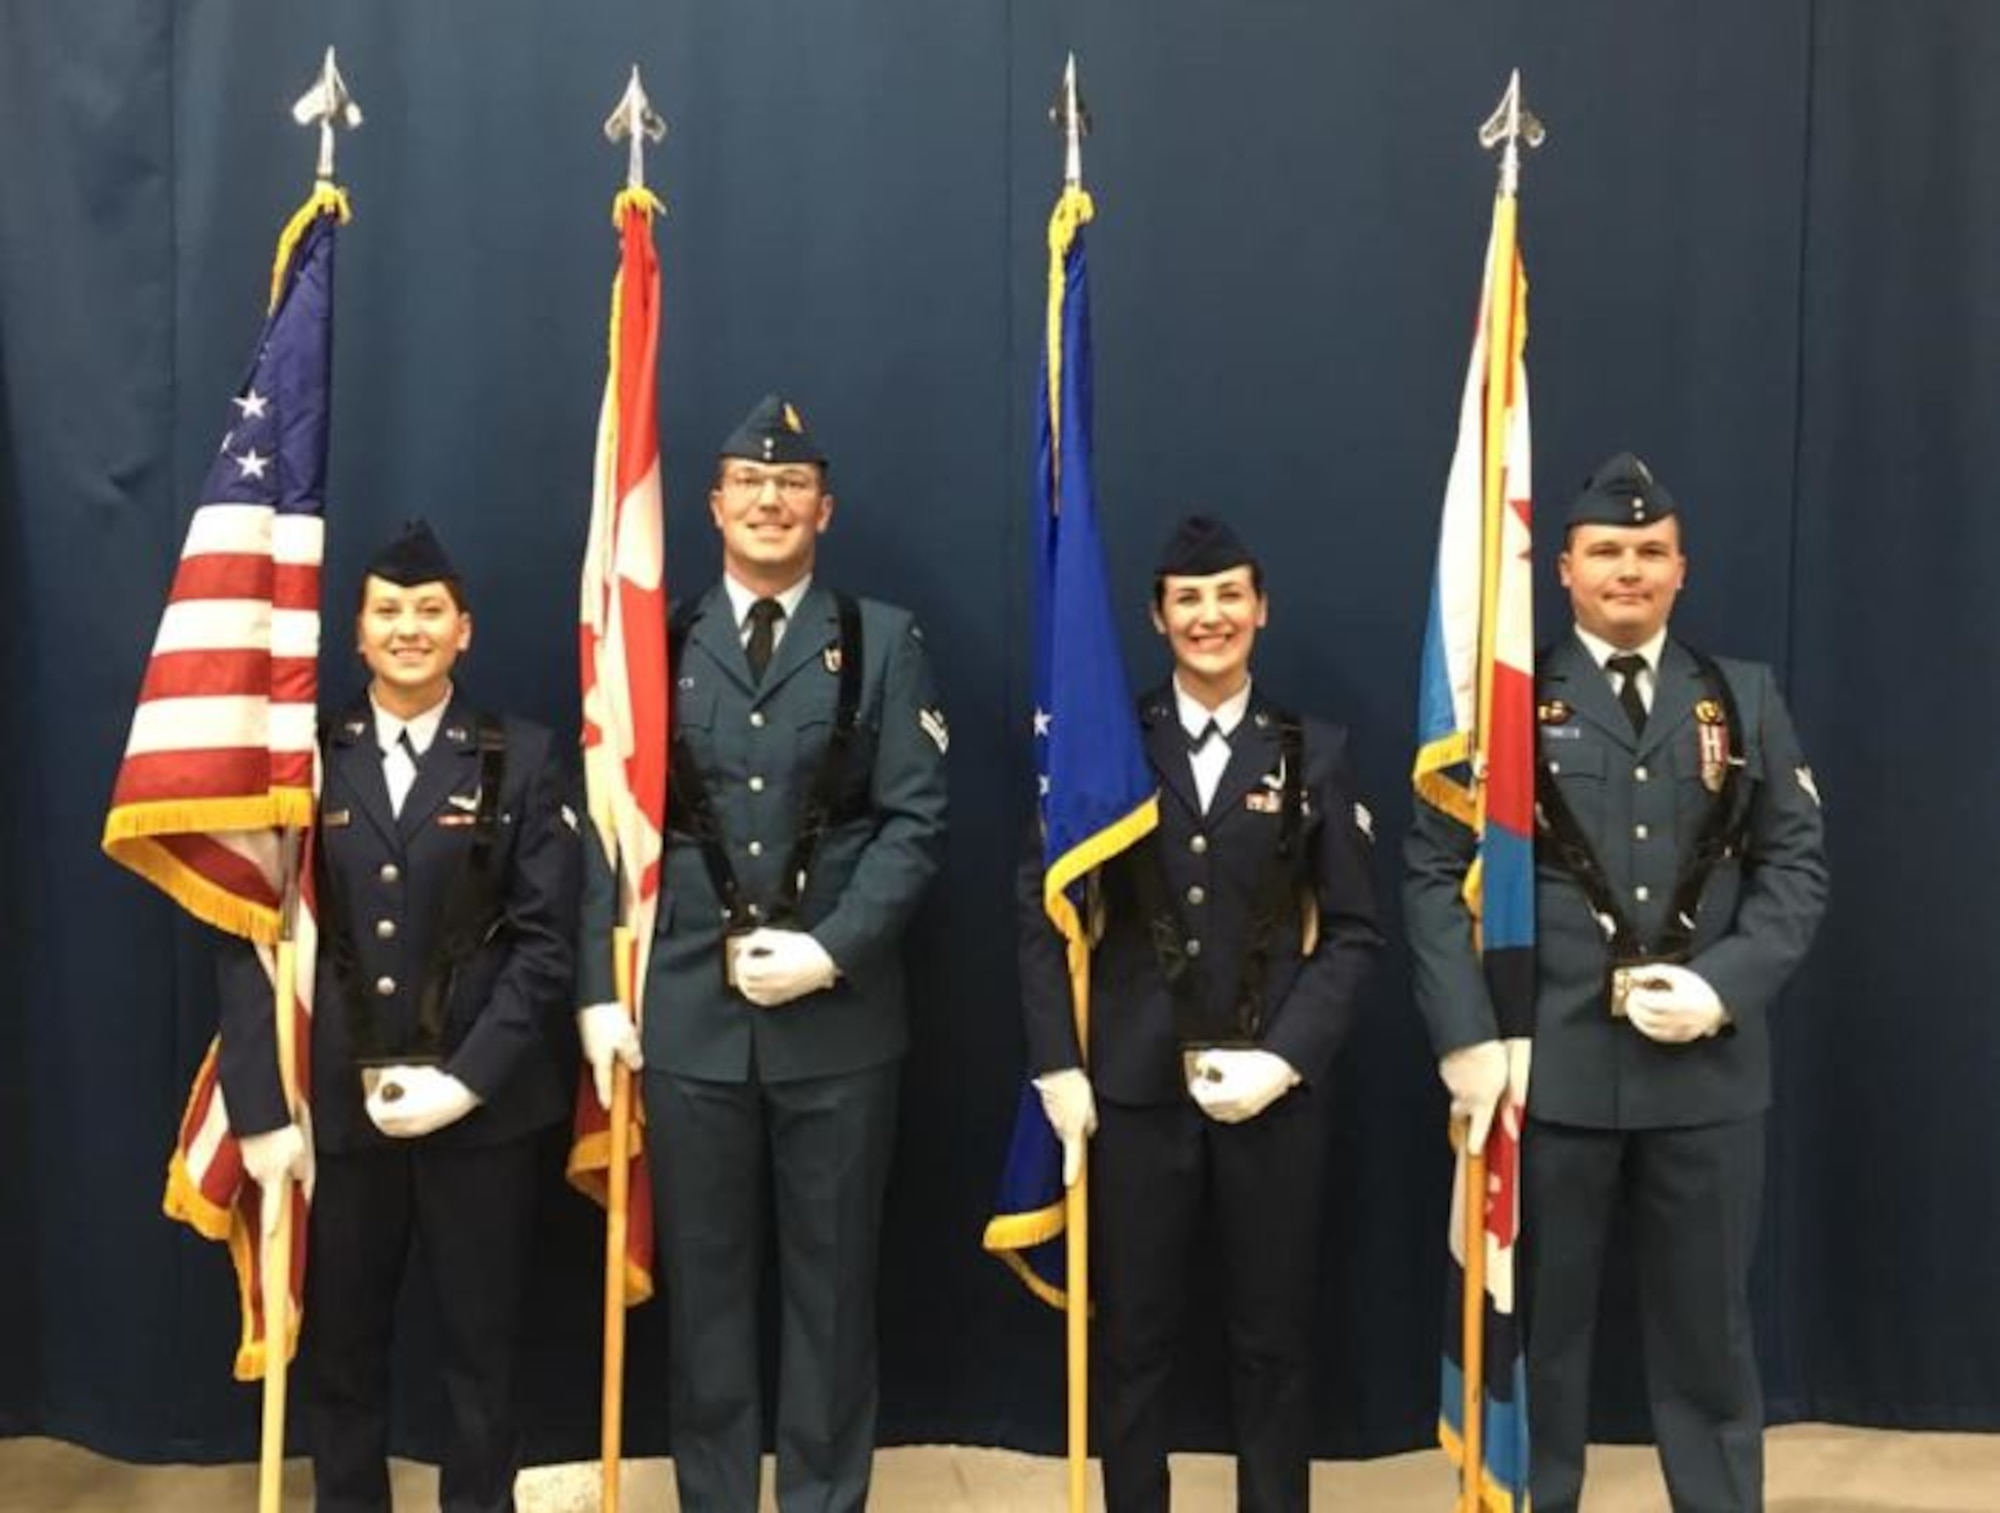 Members of the Canadian Detachment and the 552nd Air Control Wing present the colors at the Oklahoma City Thunder basketball game March 20, as the Toronto Raptors were the visiting team. From left, Airman 1st Class Melissa Rosenthal, 552nd ACW; Master Cpl. Francis Roller, Canadian Detachment; Senior Airman Ashley Lopez, 552nd ACW and Master Cpl. Brandon Rice, Canadian Detachment.